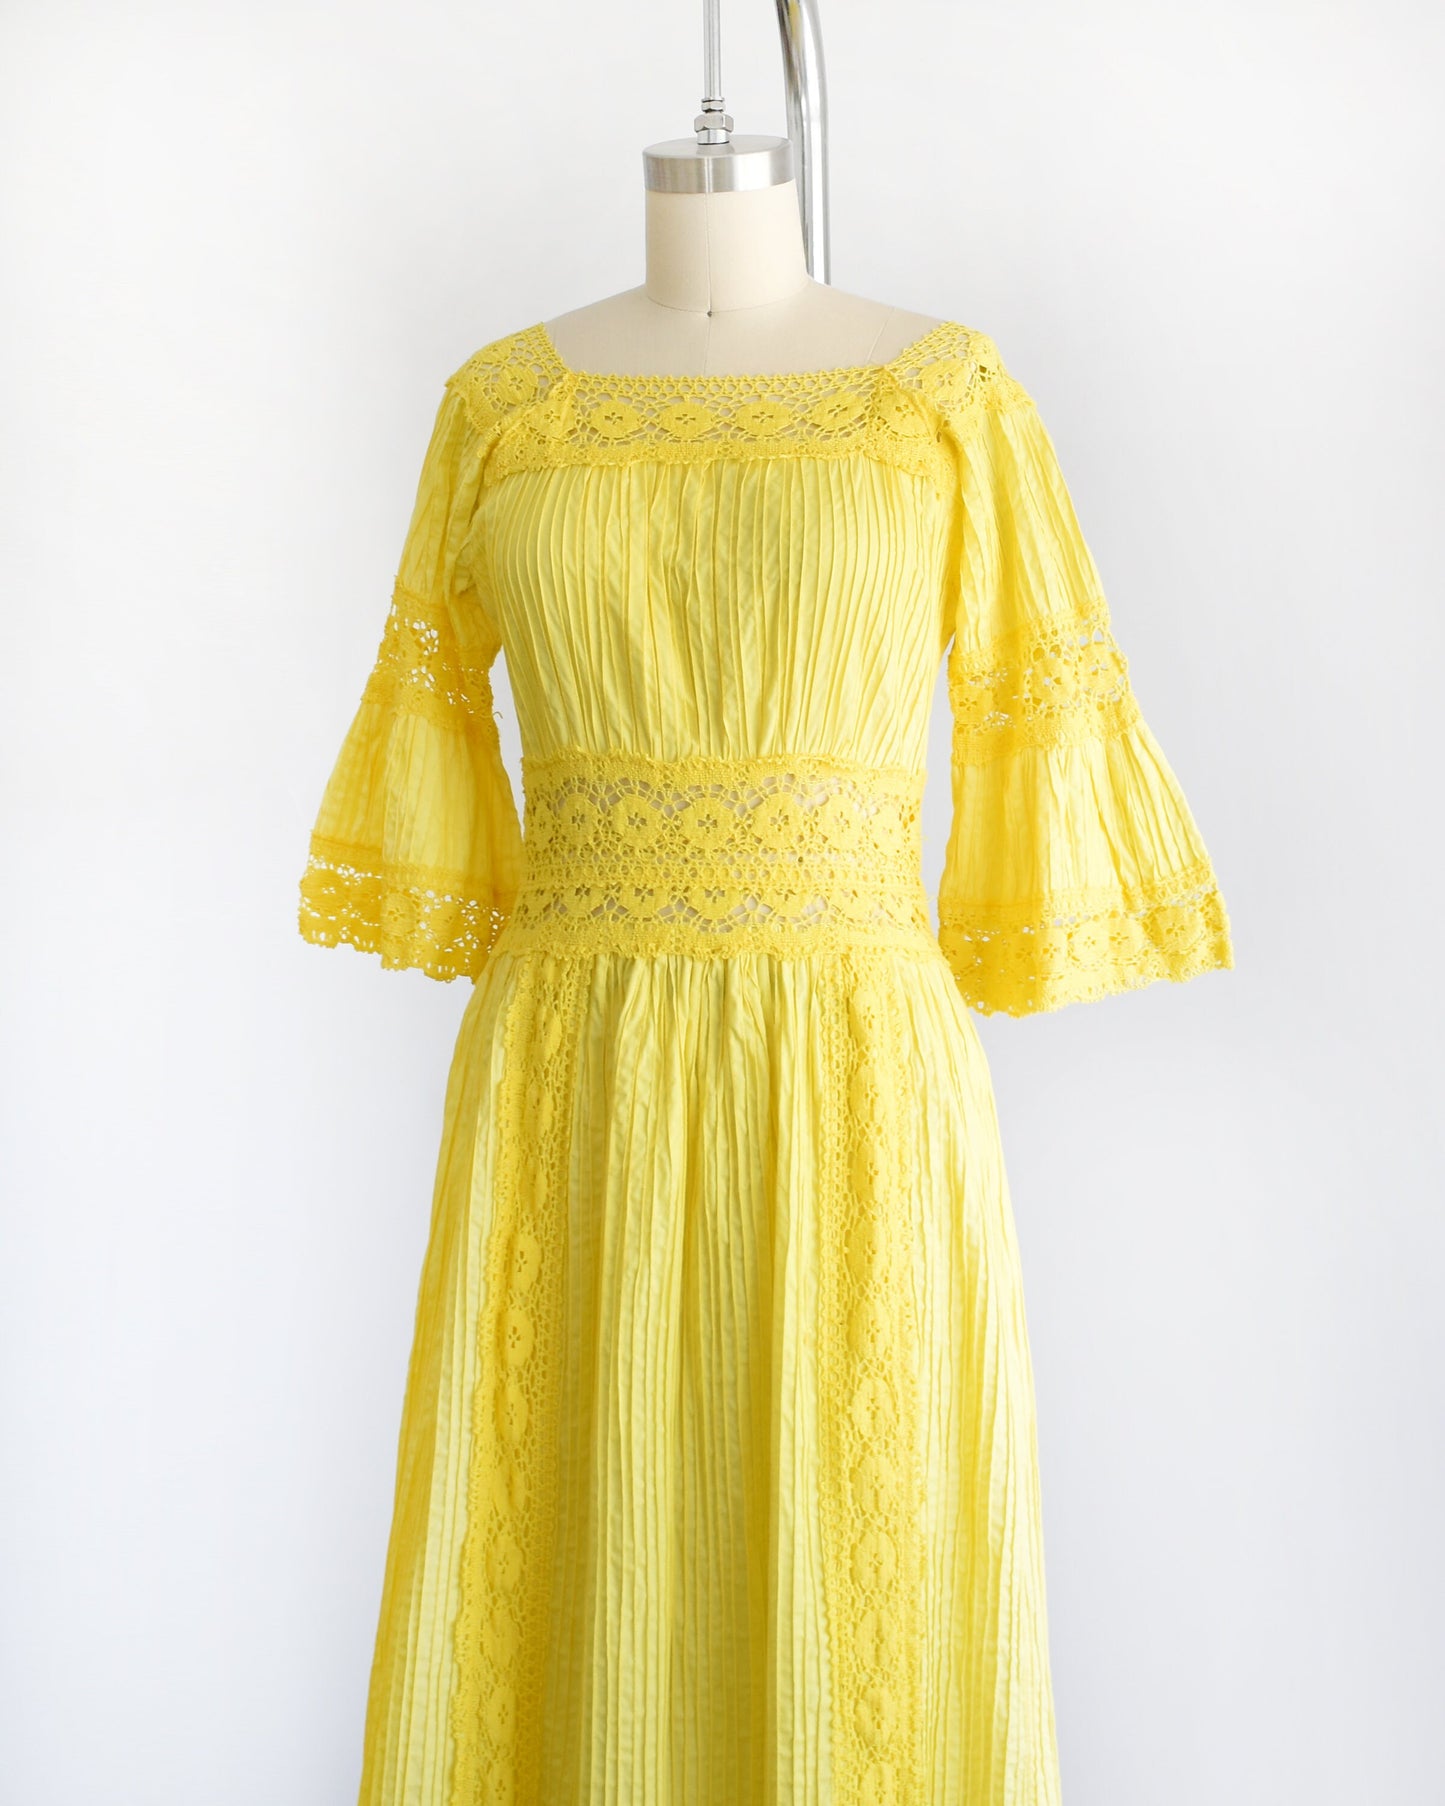 Side front view of a vintage 70s yellow maxi dress with pin tuck pleats, along with lace trim around the collar, bell sleeves, waist, down the front, and around the hem. The dress is on a dress form.